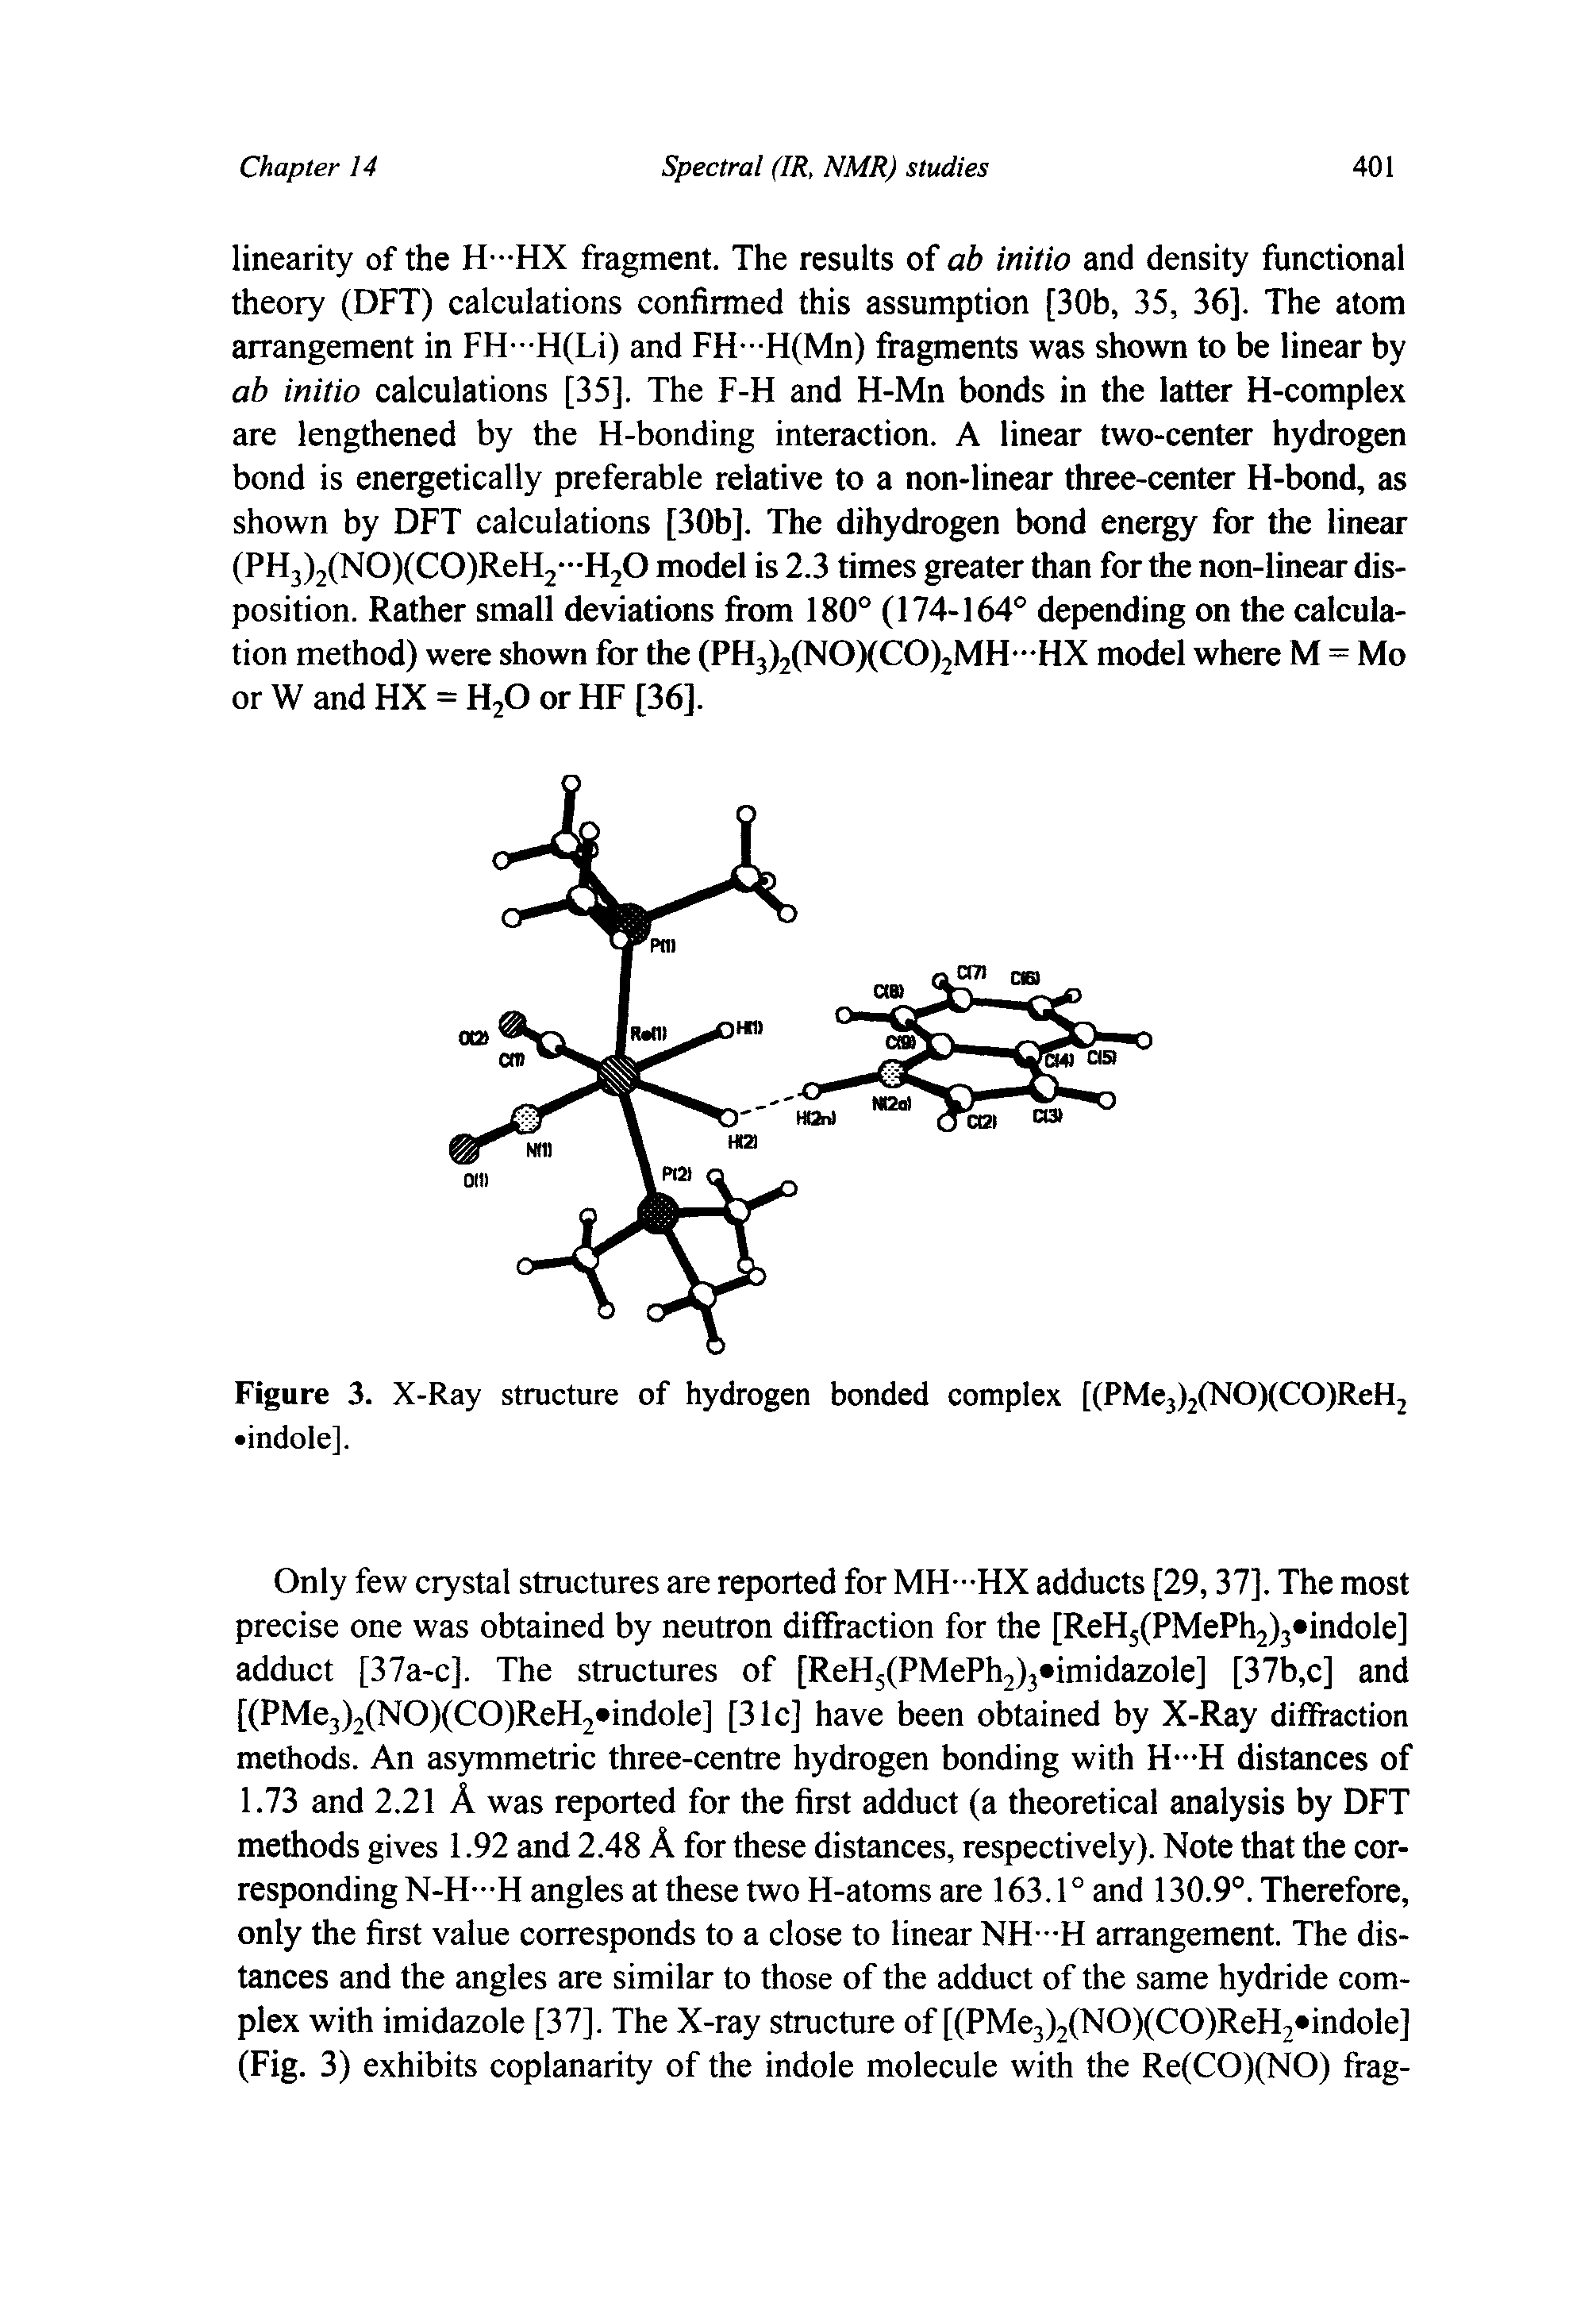 Figure 3. X-Ray structure of hydrogen bonded complex [(PMe3)2(NO)(CO)ReH2 indole].